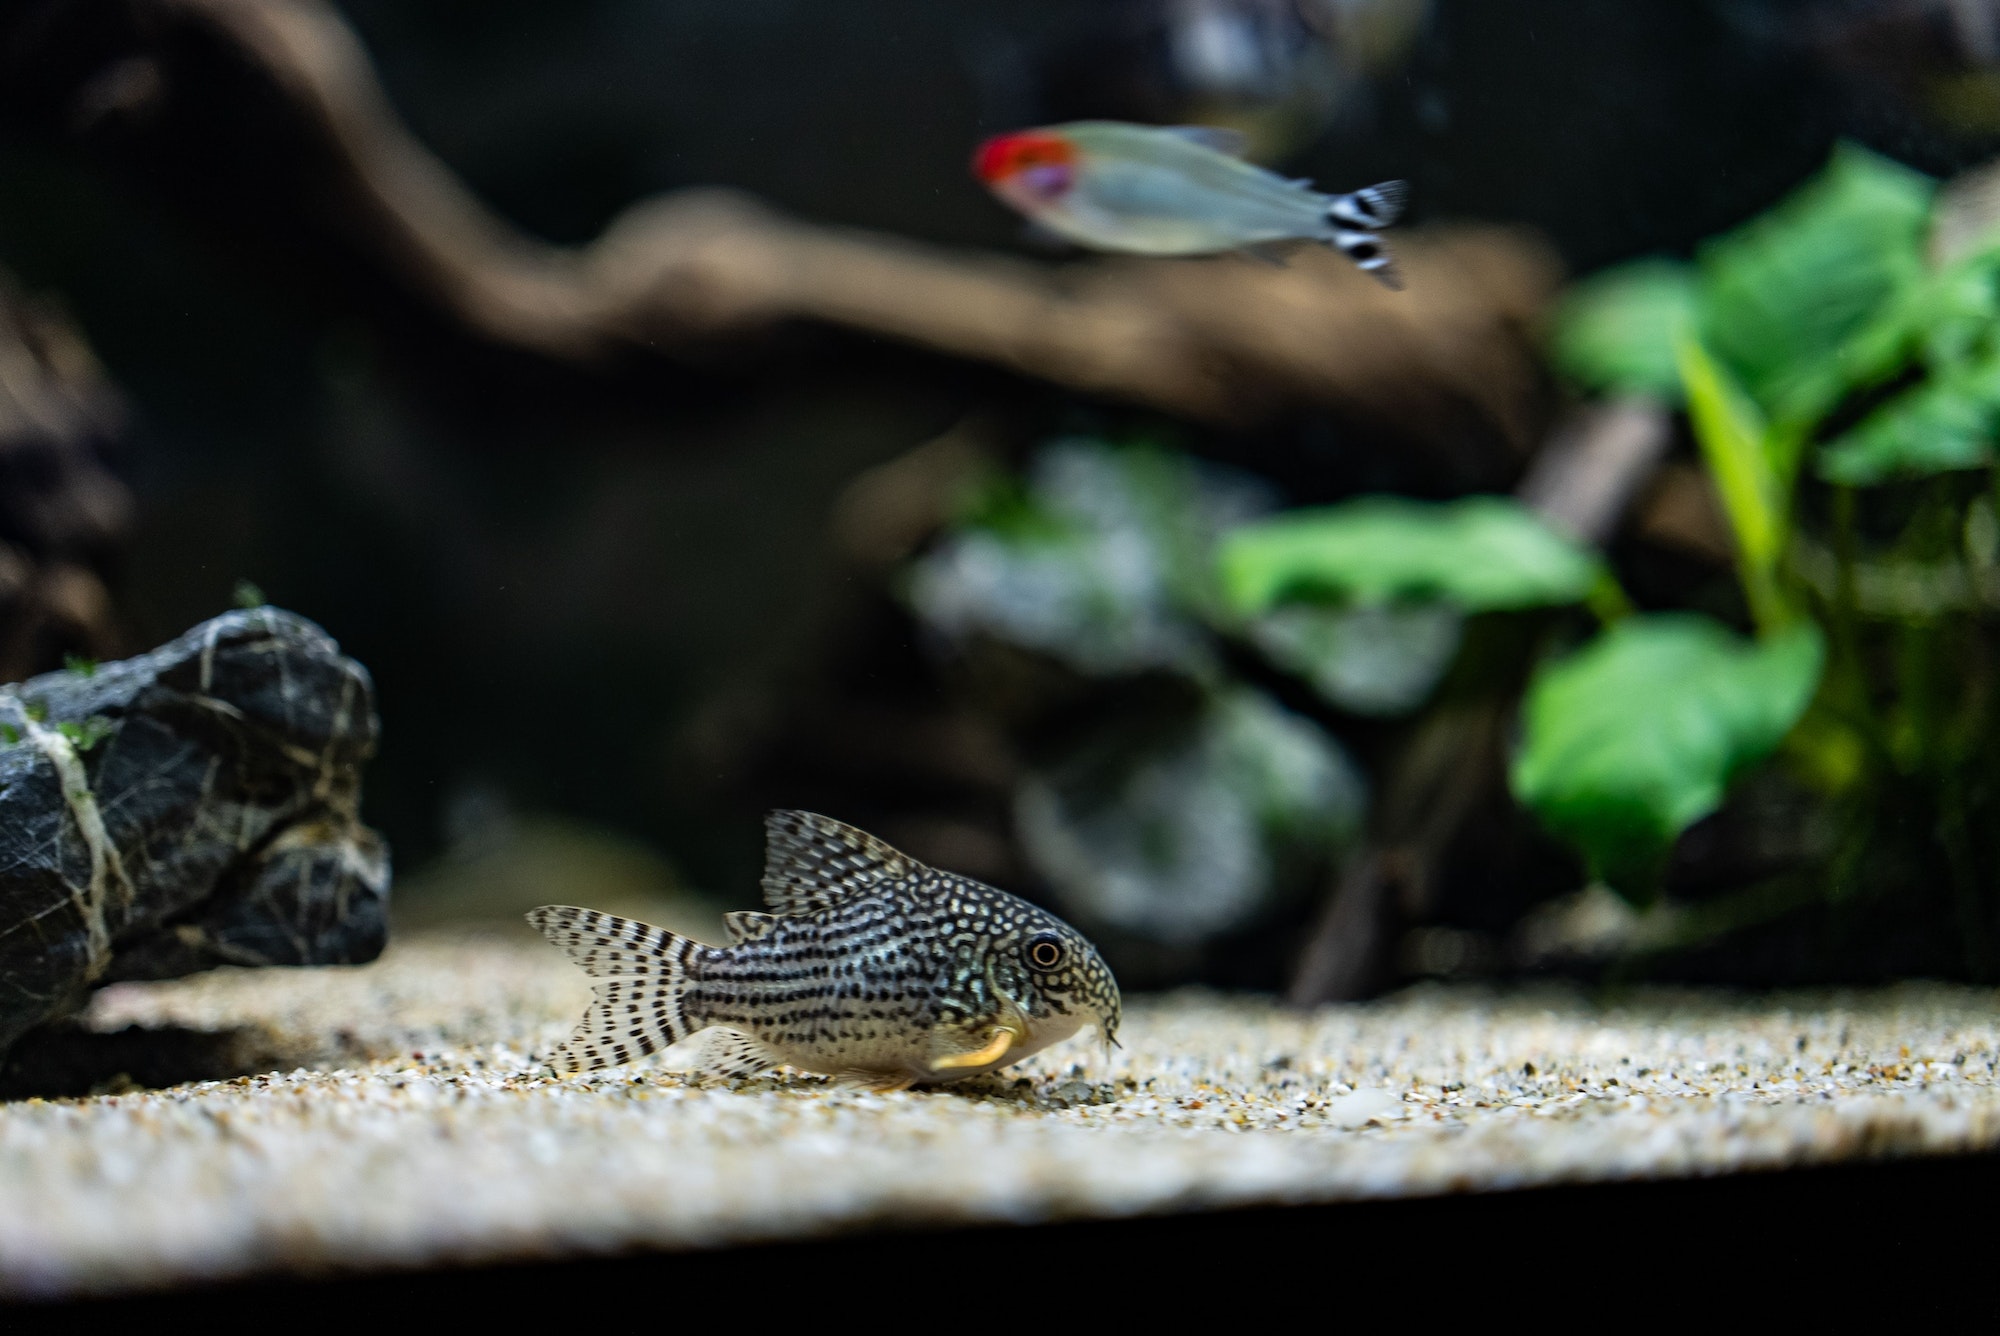 Sterbai Catfish dwells on gravel at the bottom of a fish tank filled with rocks and plants